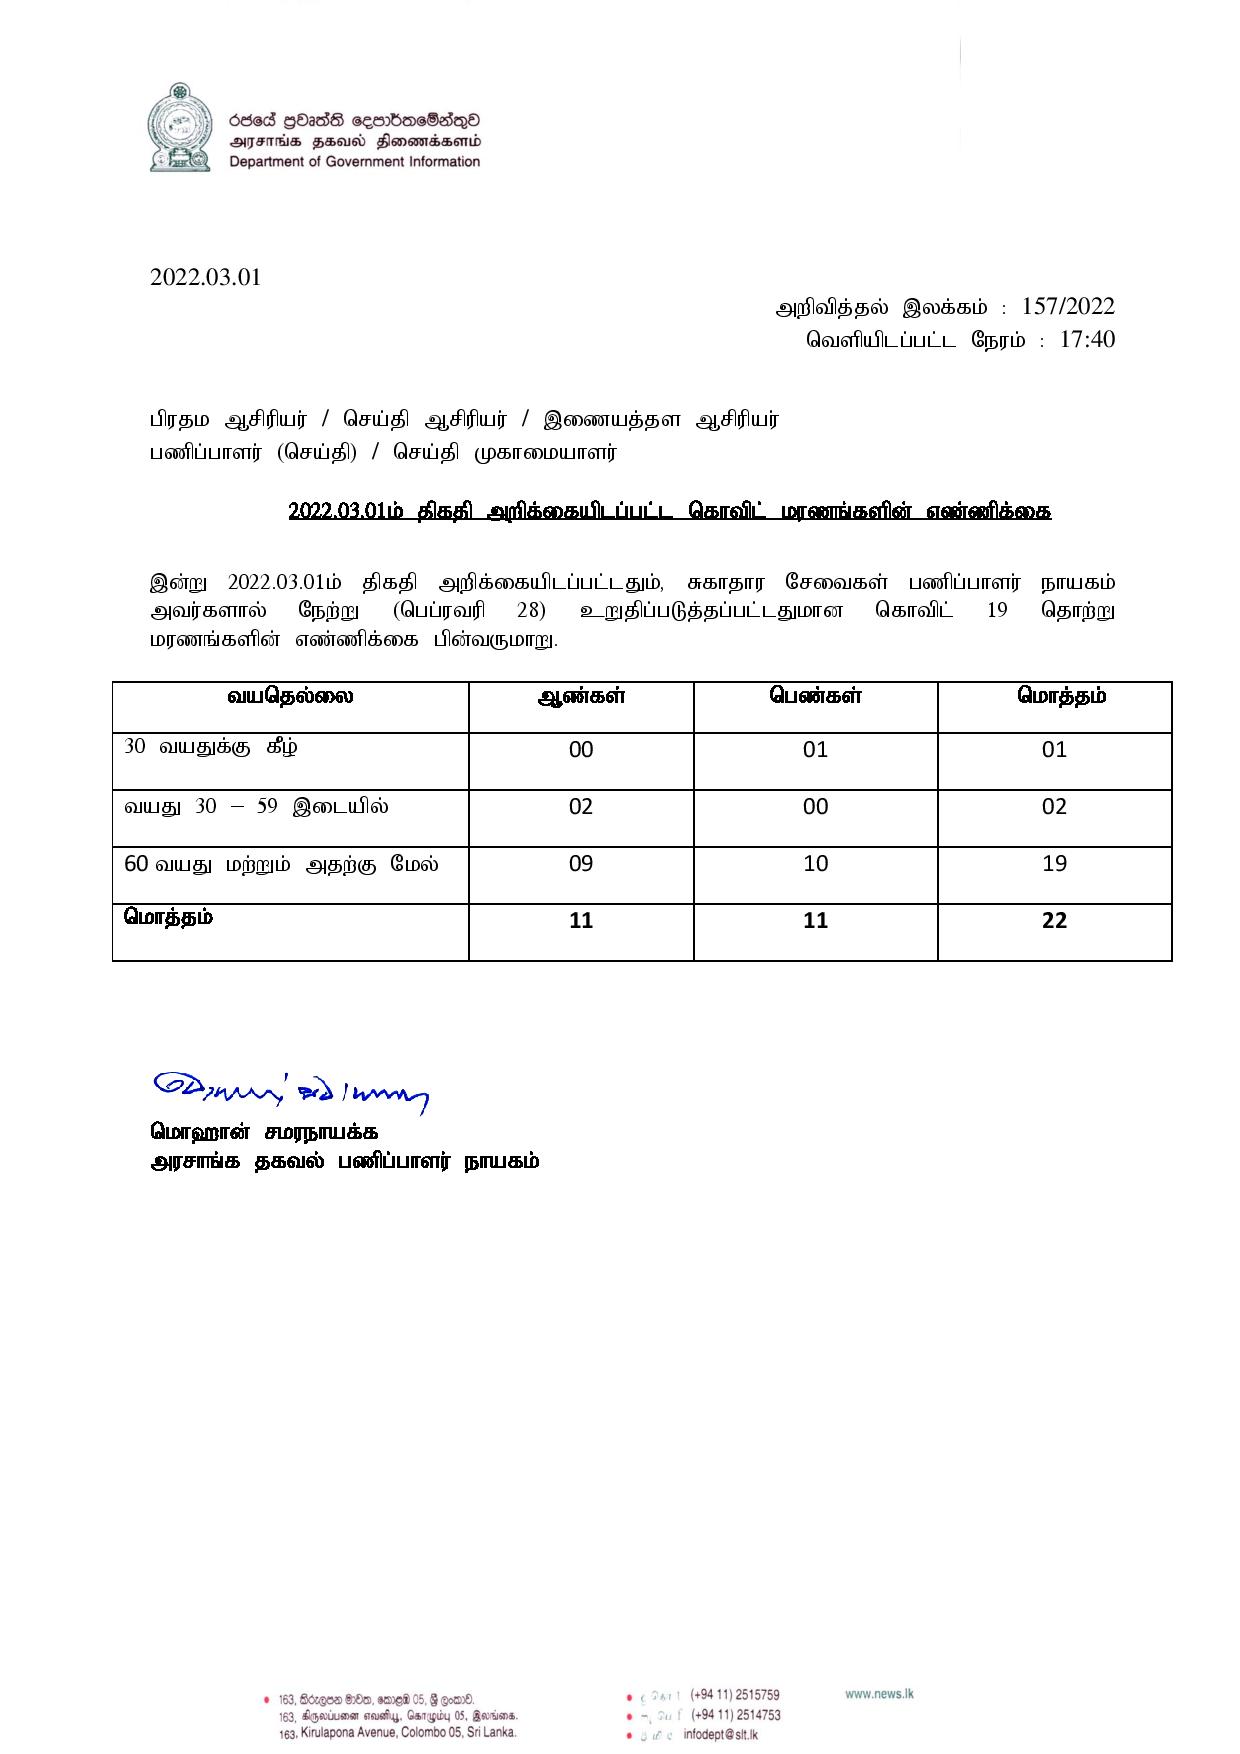 Press Release 157 Tamil page 001